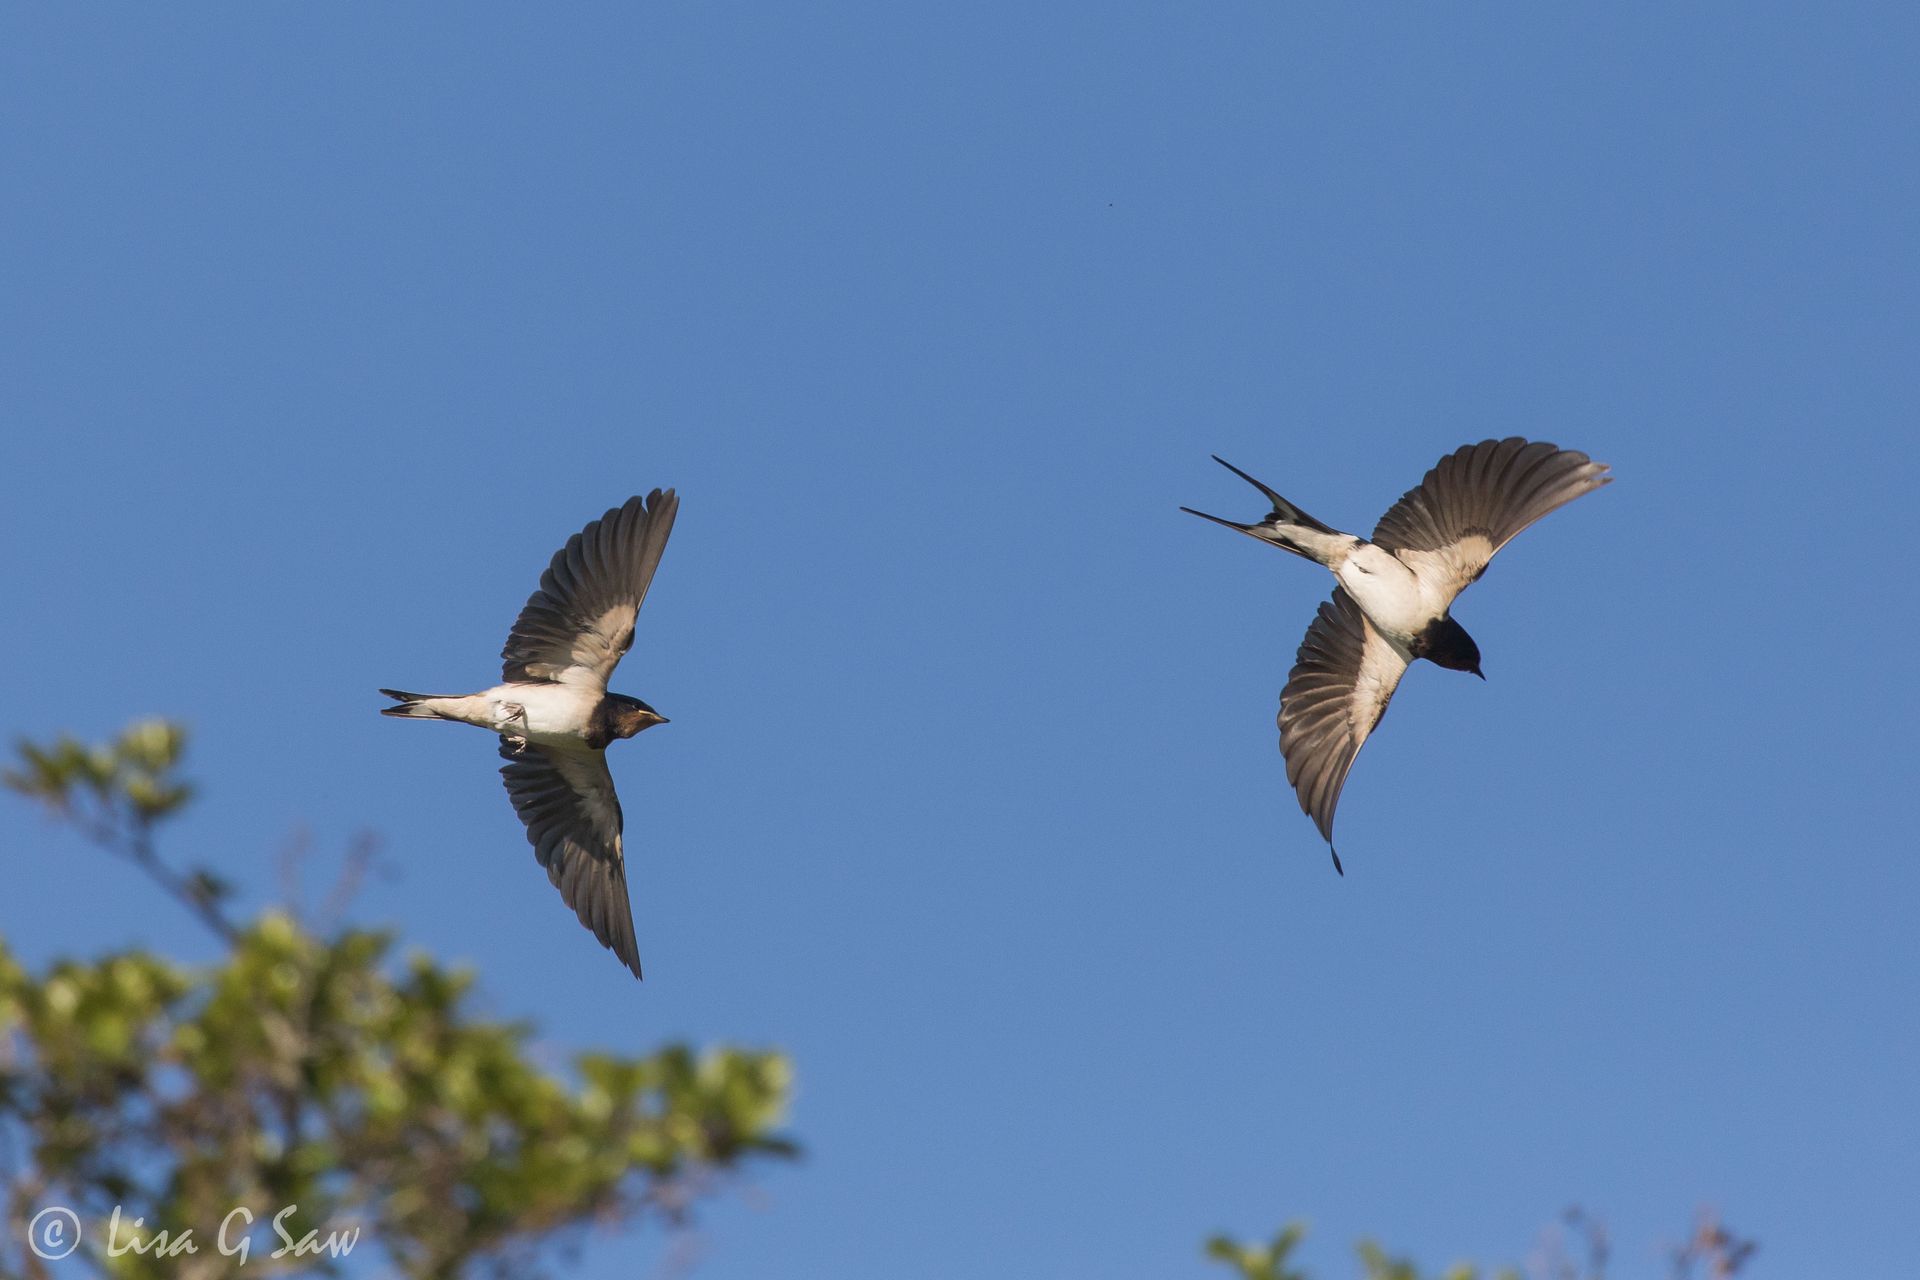 An adult and juvenile swallow flying